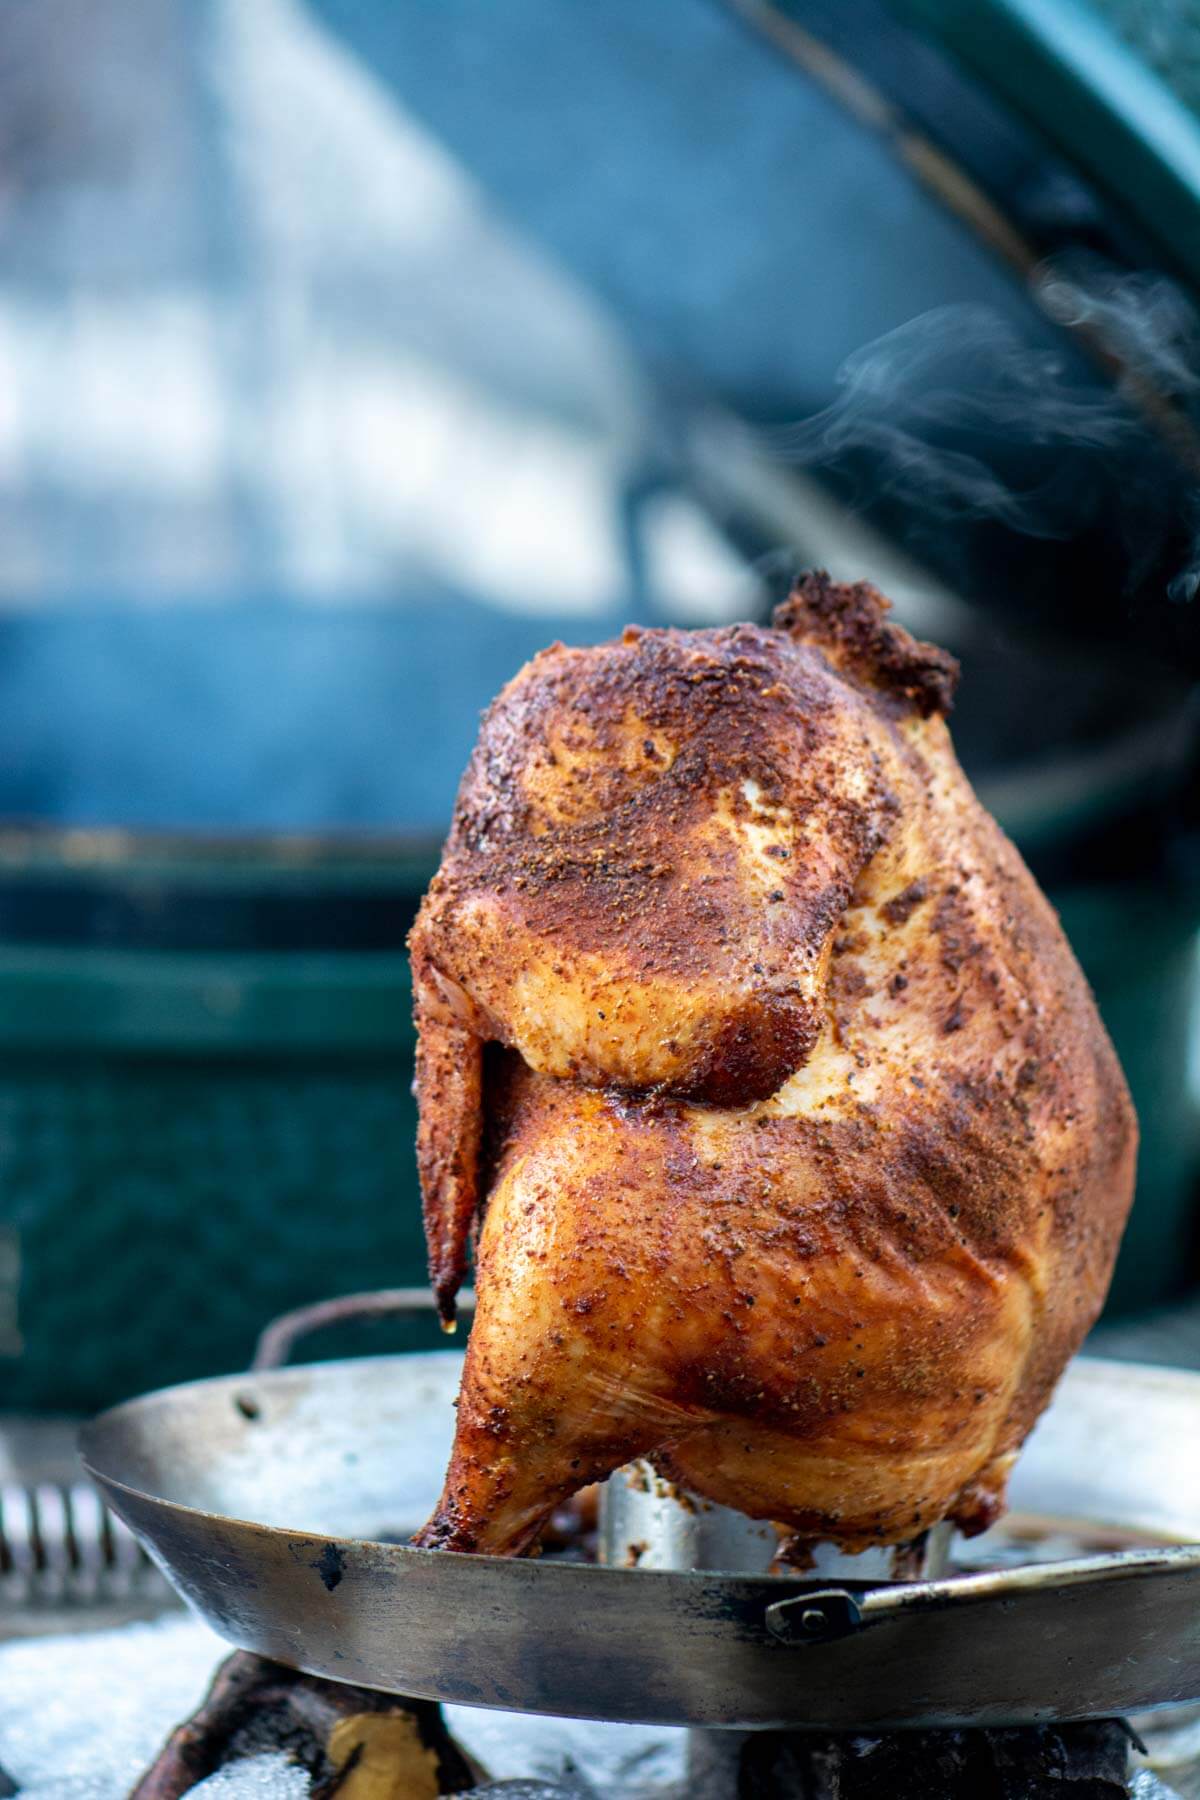 Grilled Chicken on the beer can holder in front of the Big Green Egg.